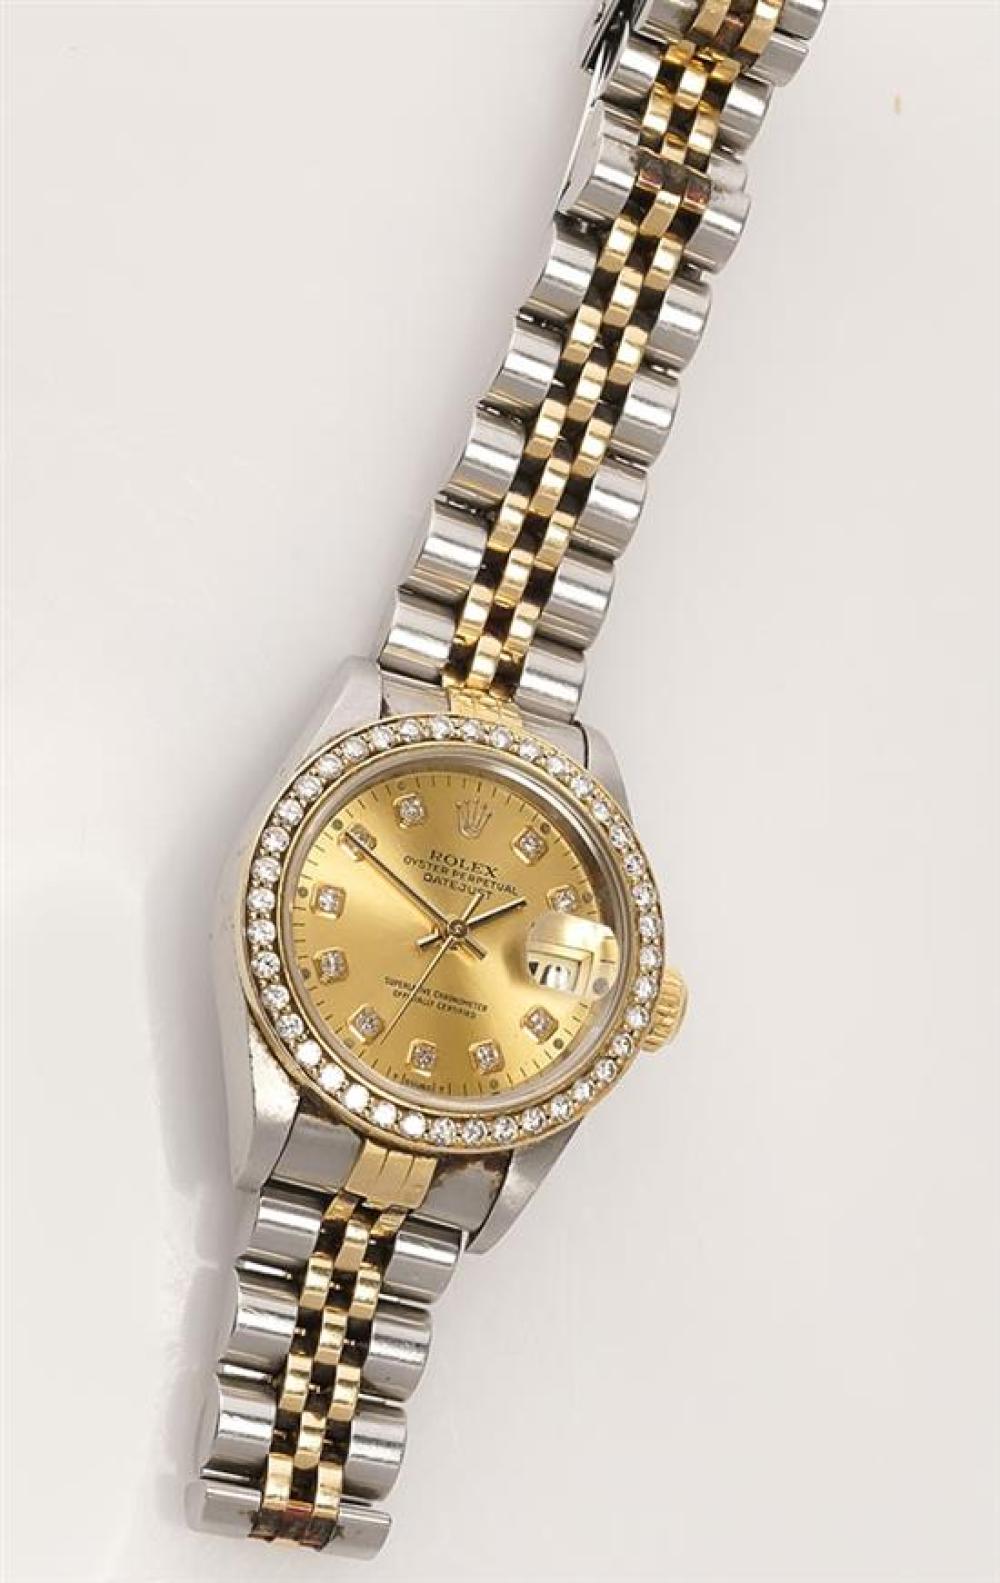 LADY'S STAINLESS STEEL, YELLOW-GOLD